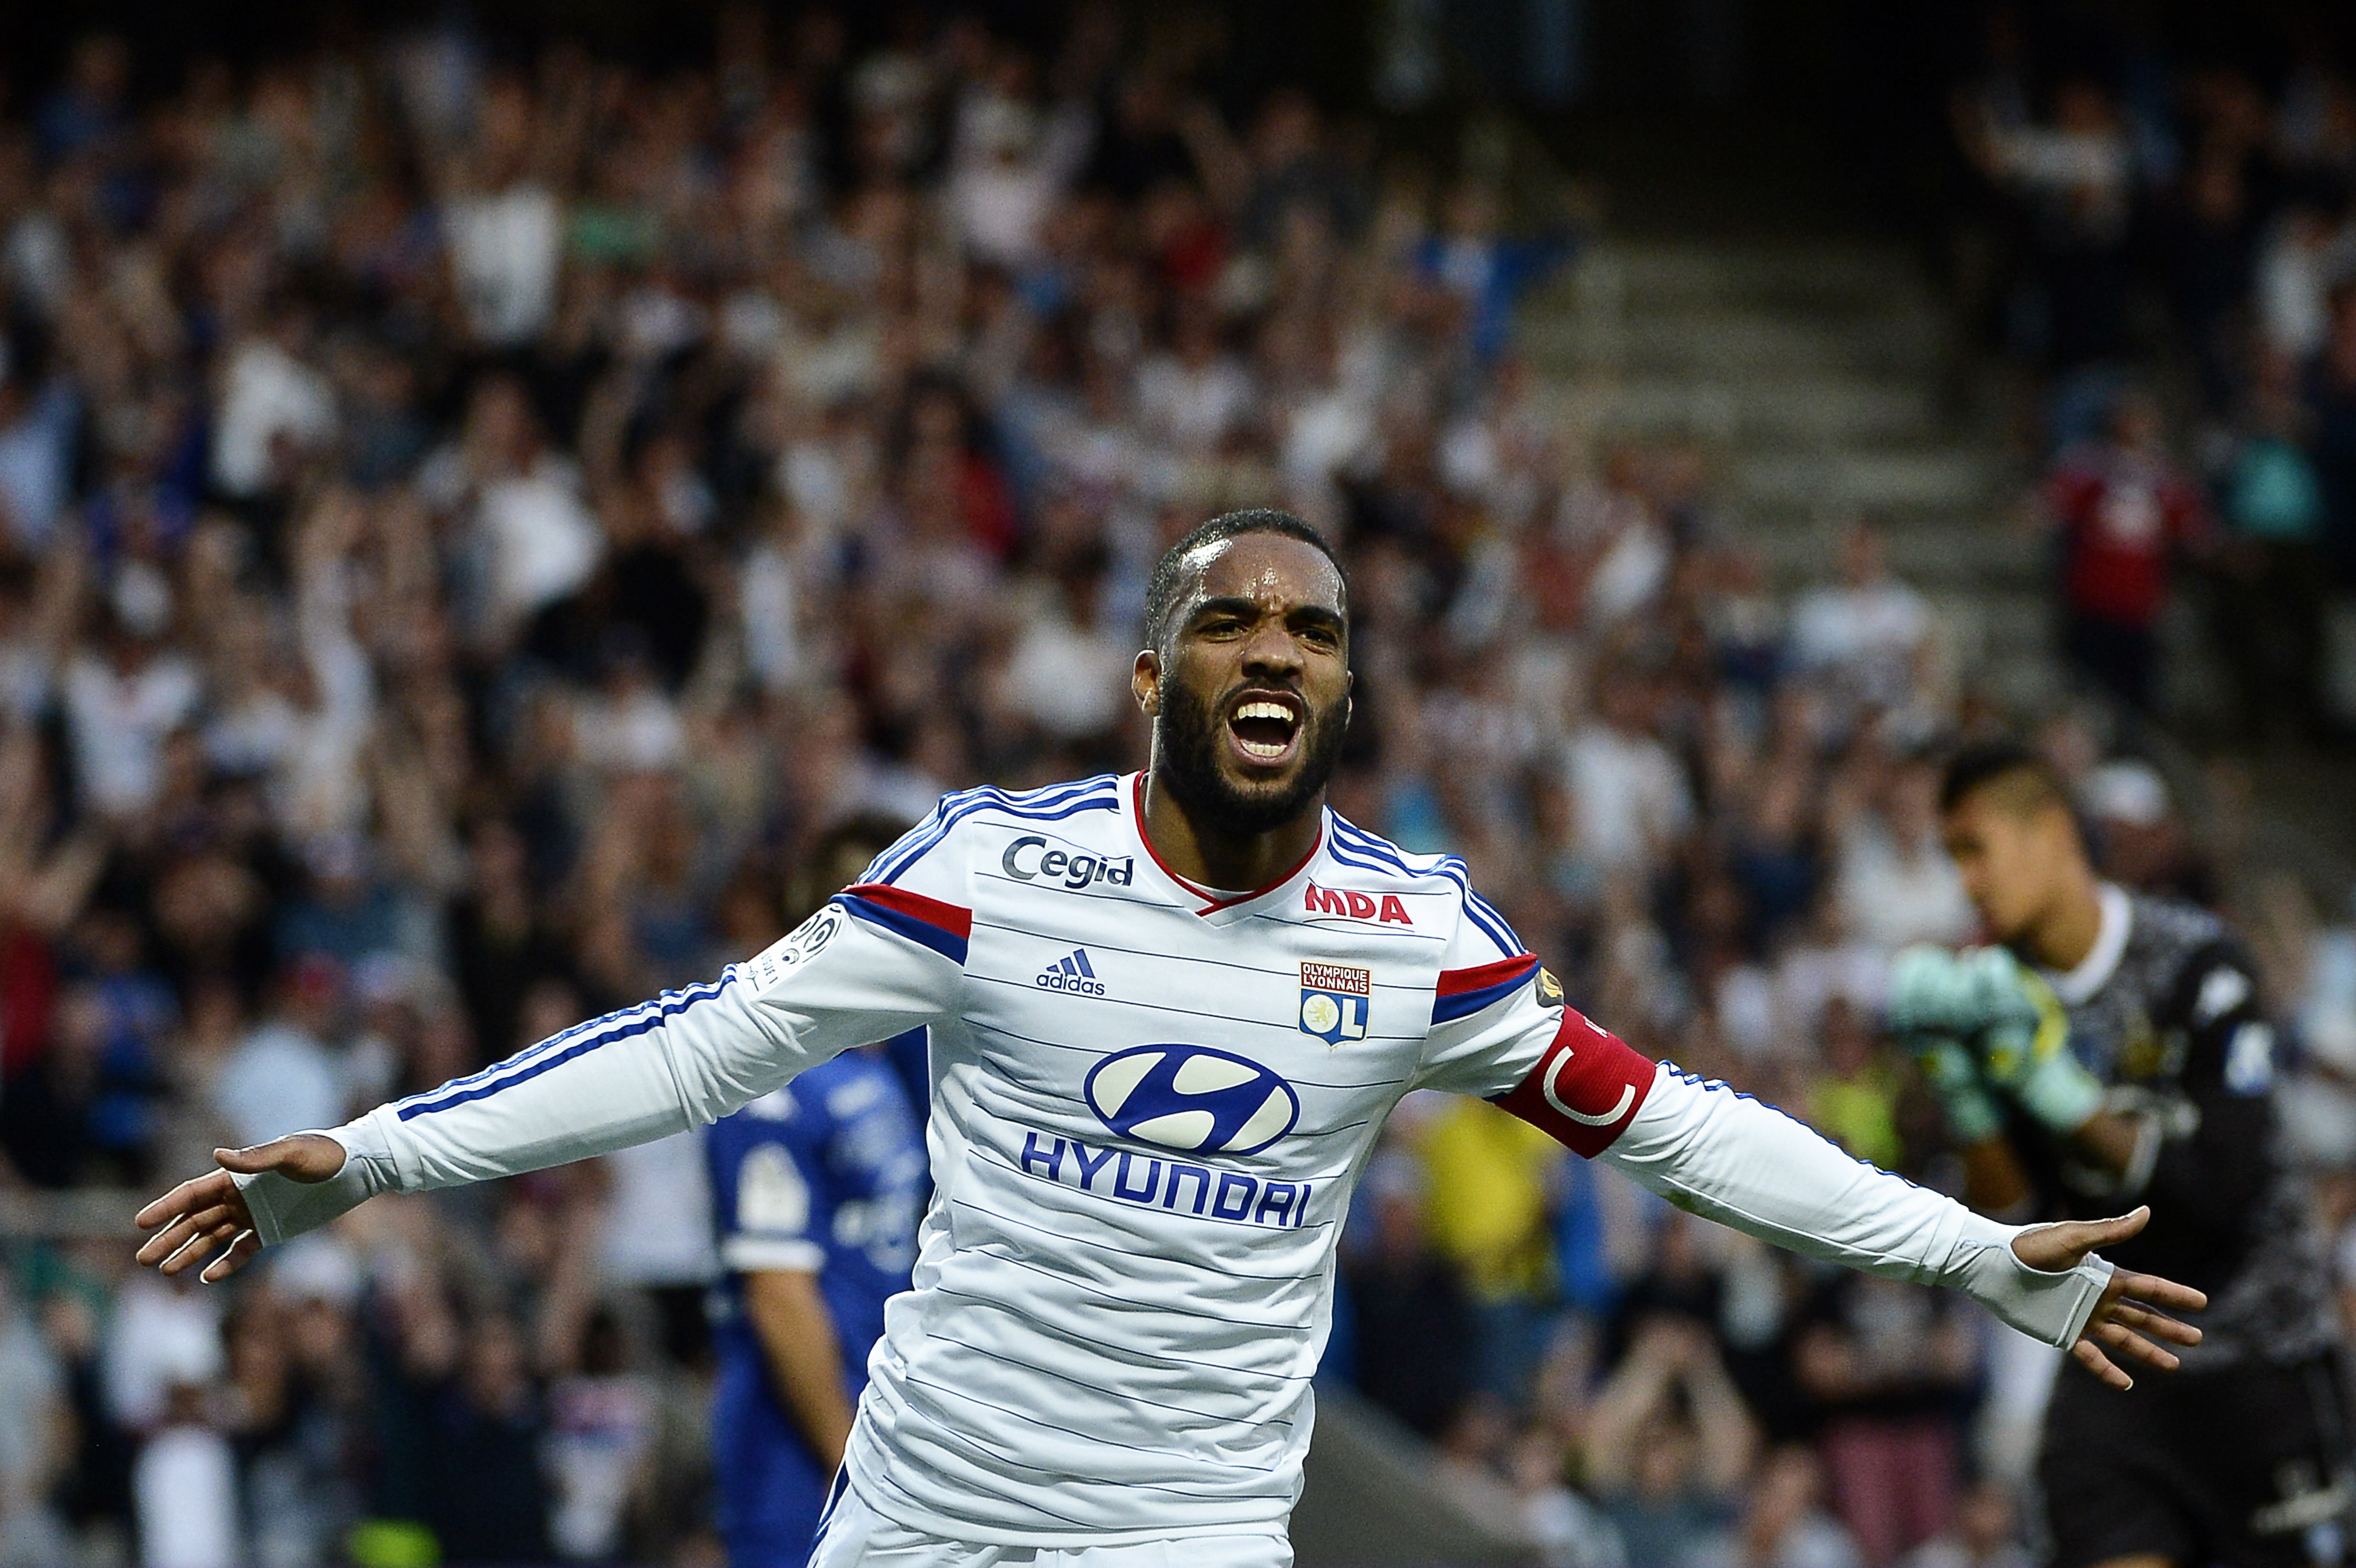 Alexandre Lacazette has established himself as one of the best forwards in Europe right now and reportedly wants to leave Lyon to take the next step in his fledgling career.(Picture Courtesy - AFP/Getty Images)